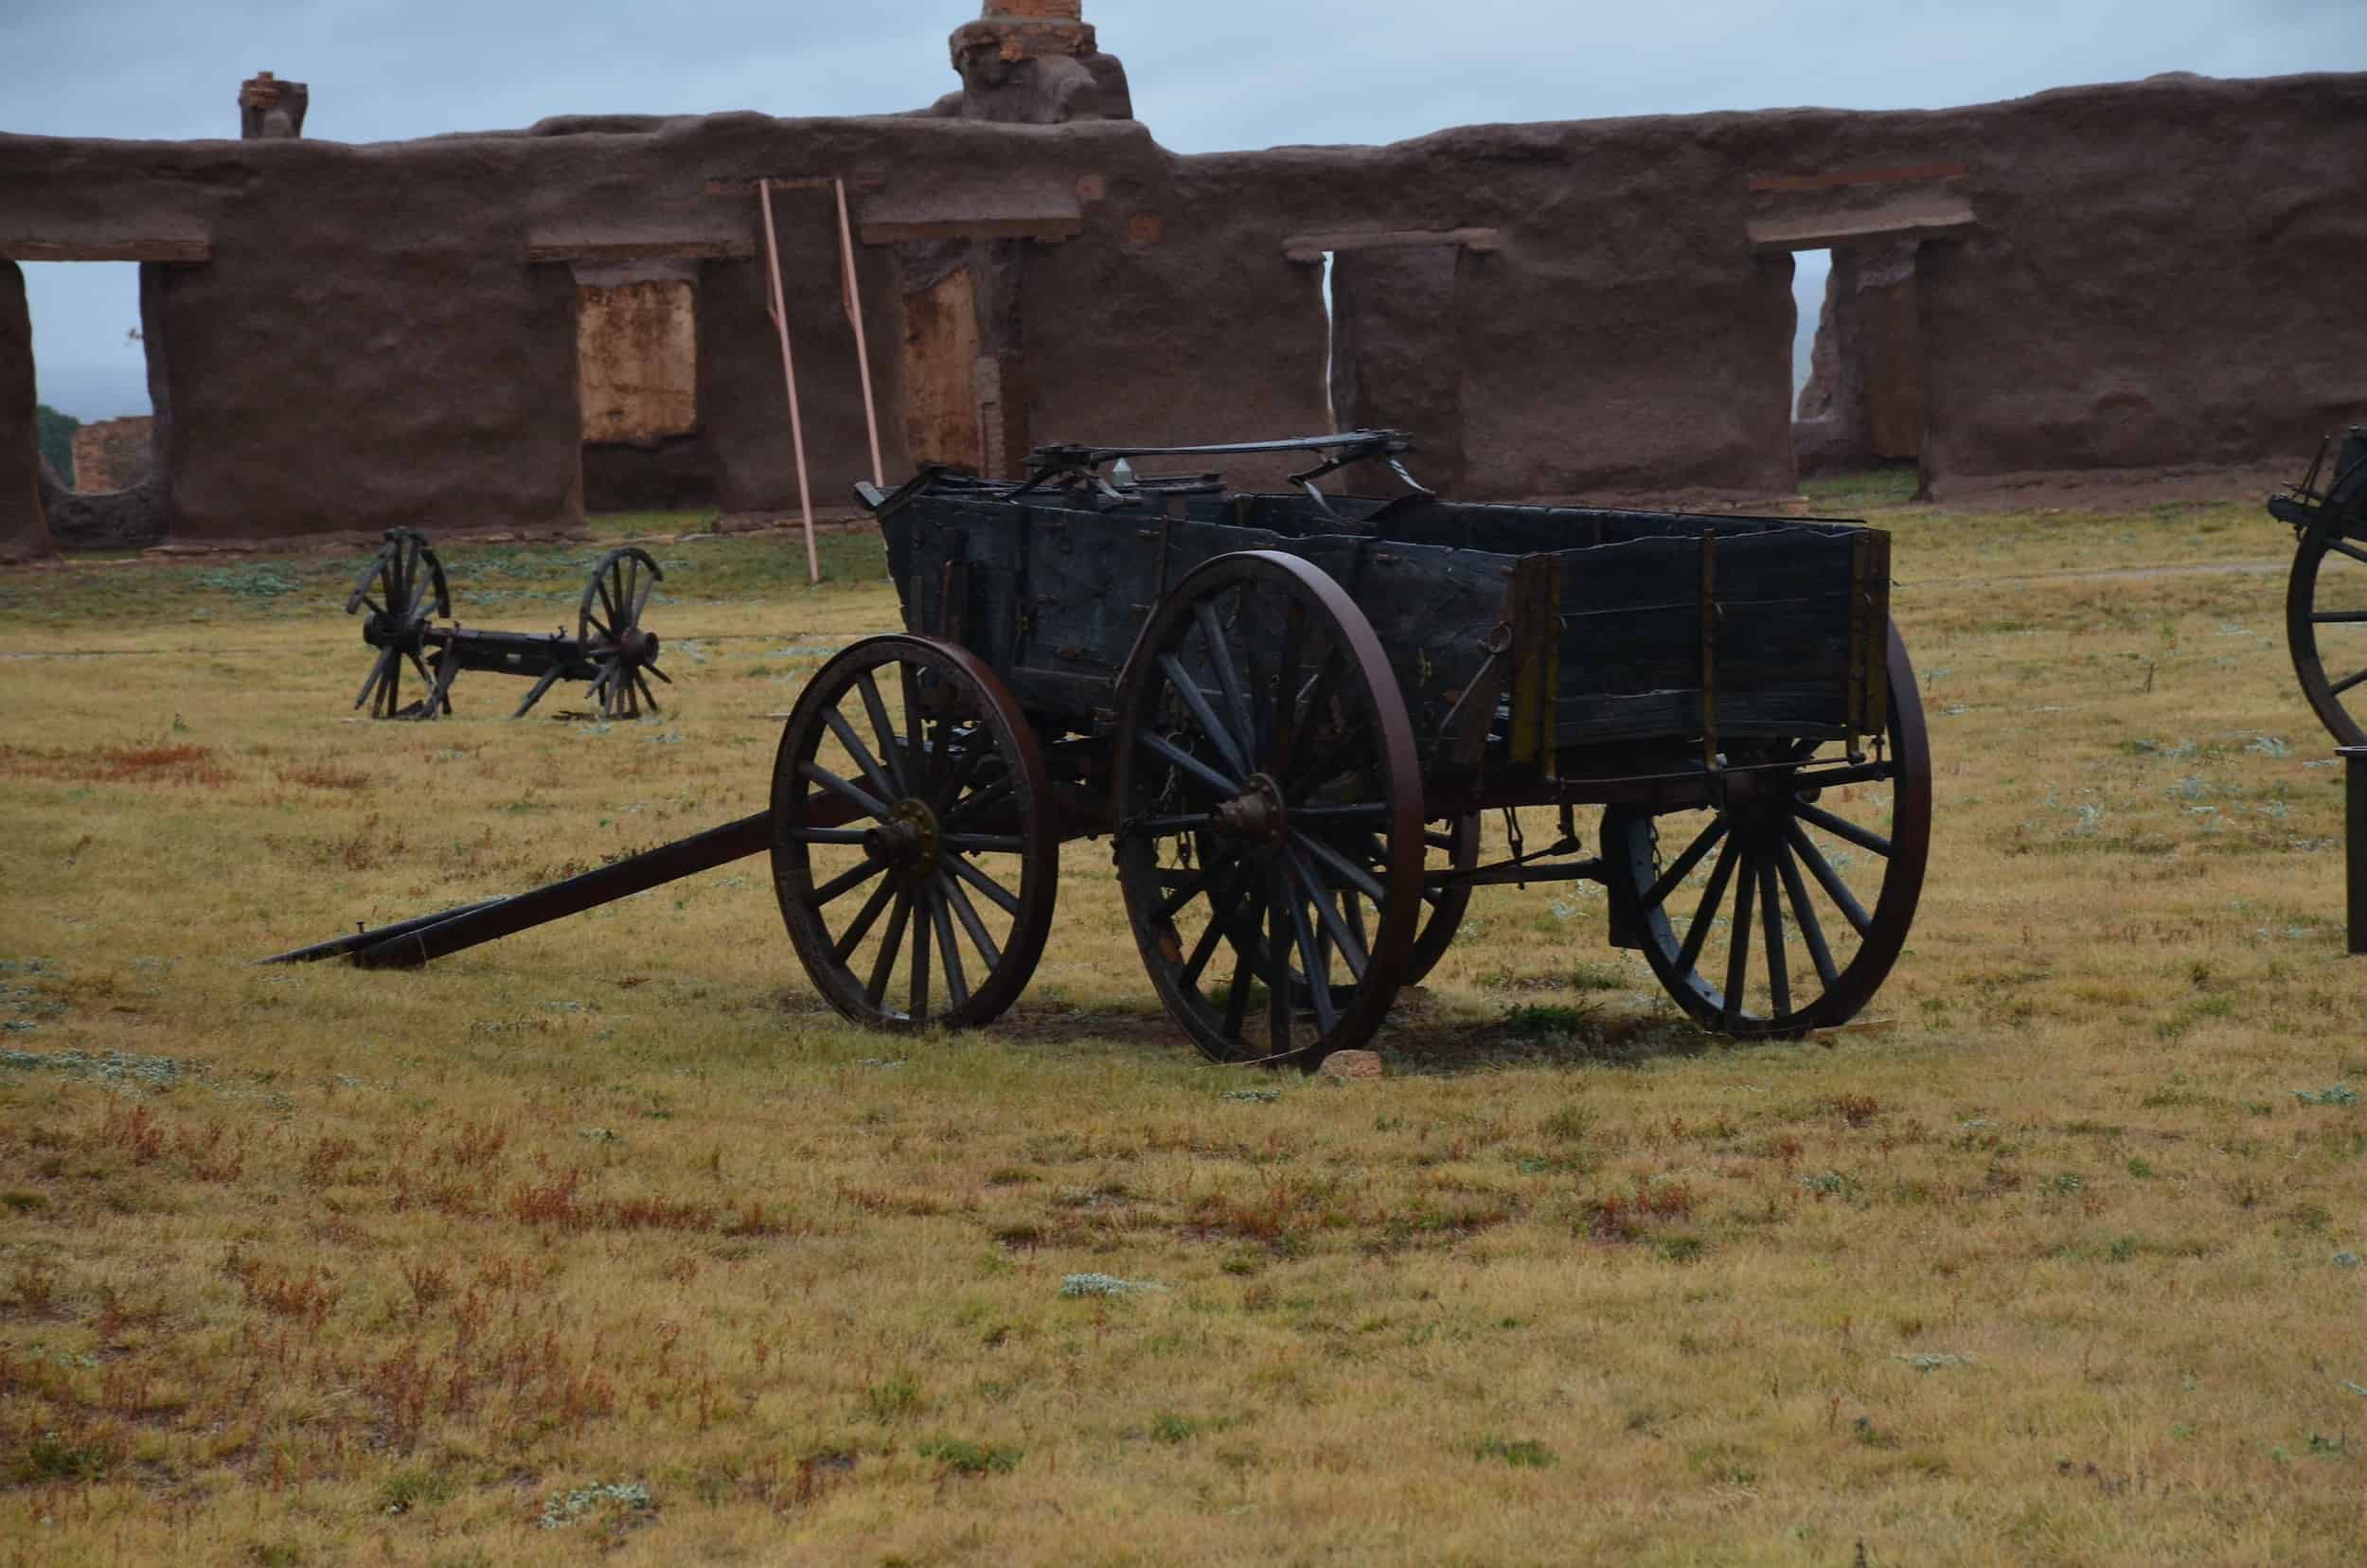 Mechanics' Corral at Fort Union National Monument in New Mexico